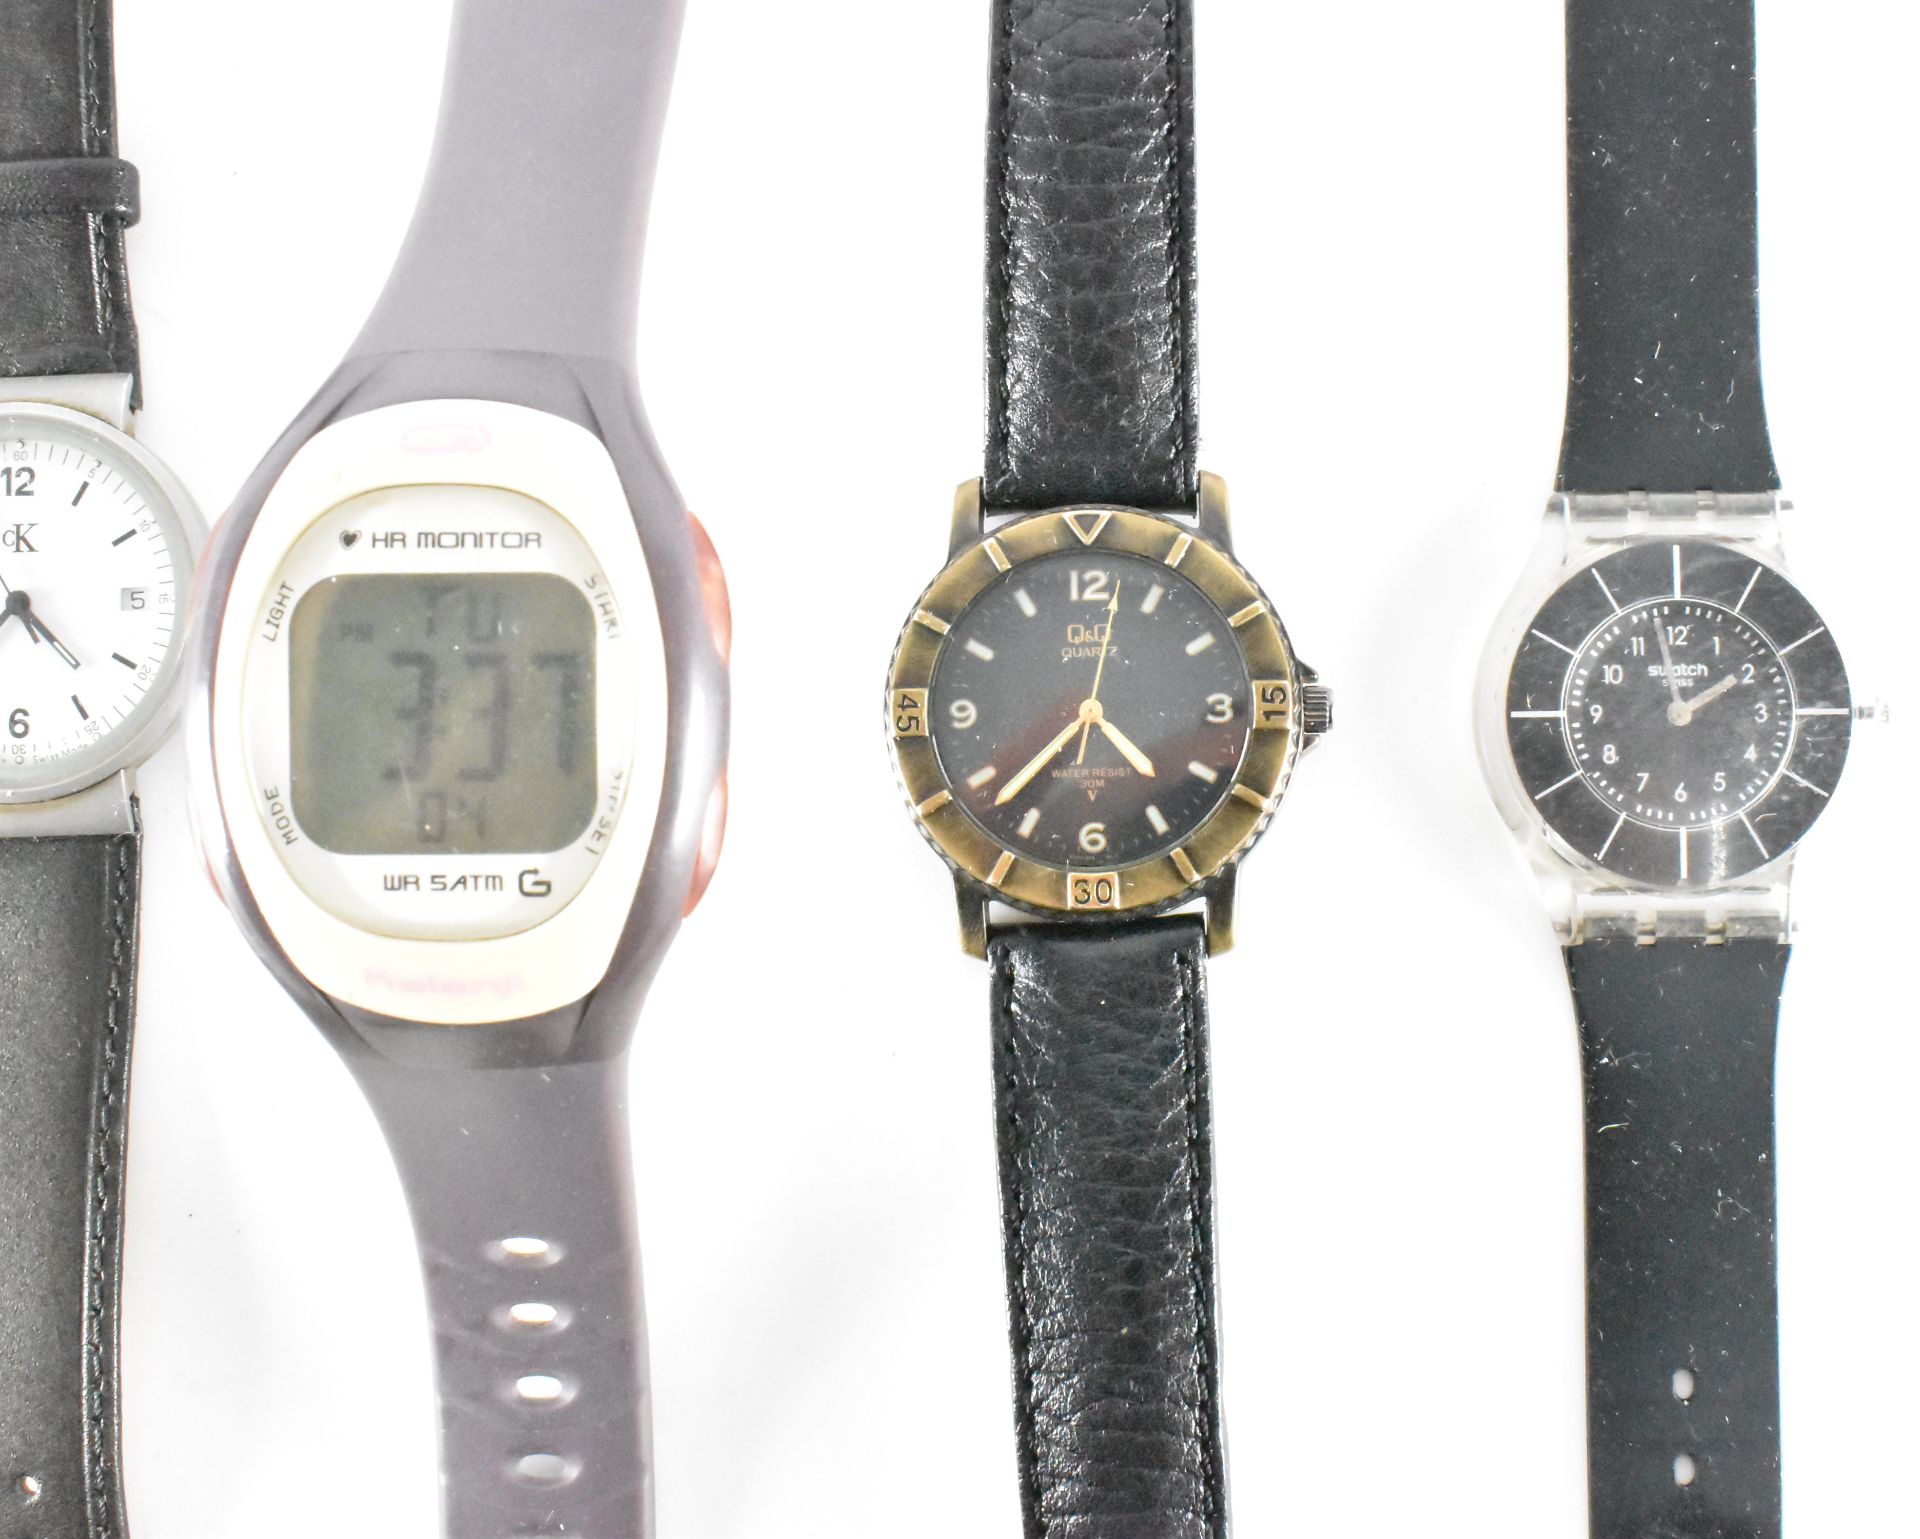 ASSORTMENT OF VARIOUS WRIST WATCHES - Image 4 of 7